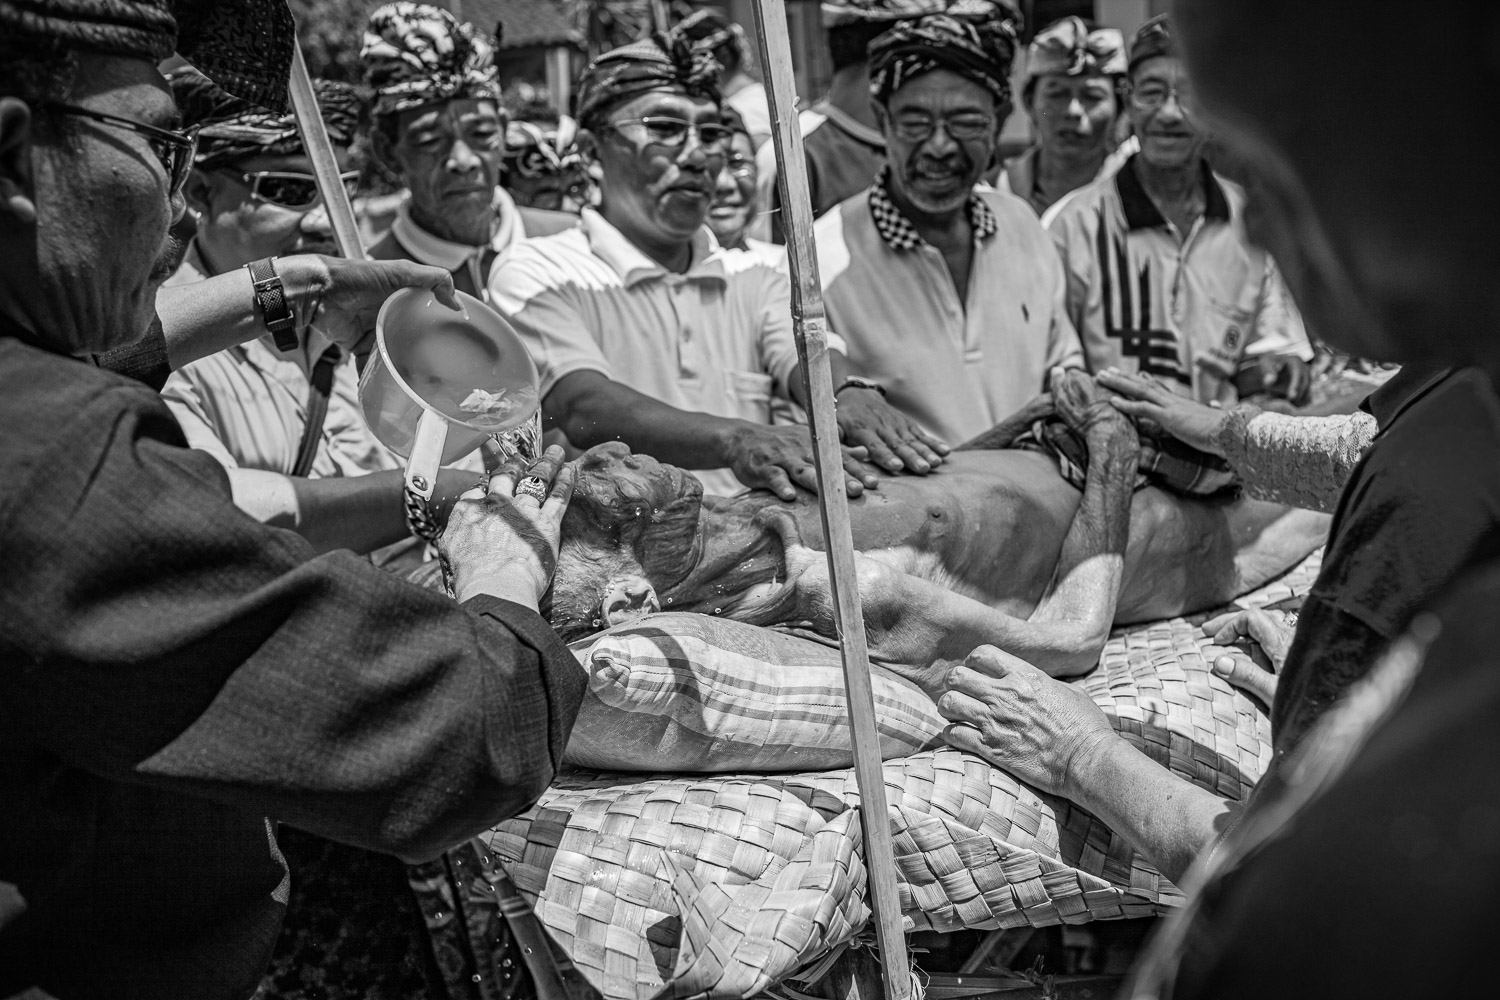 Ngaben cremation in Bali, first ritual, nyiramin layon the bathing of the corpse.